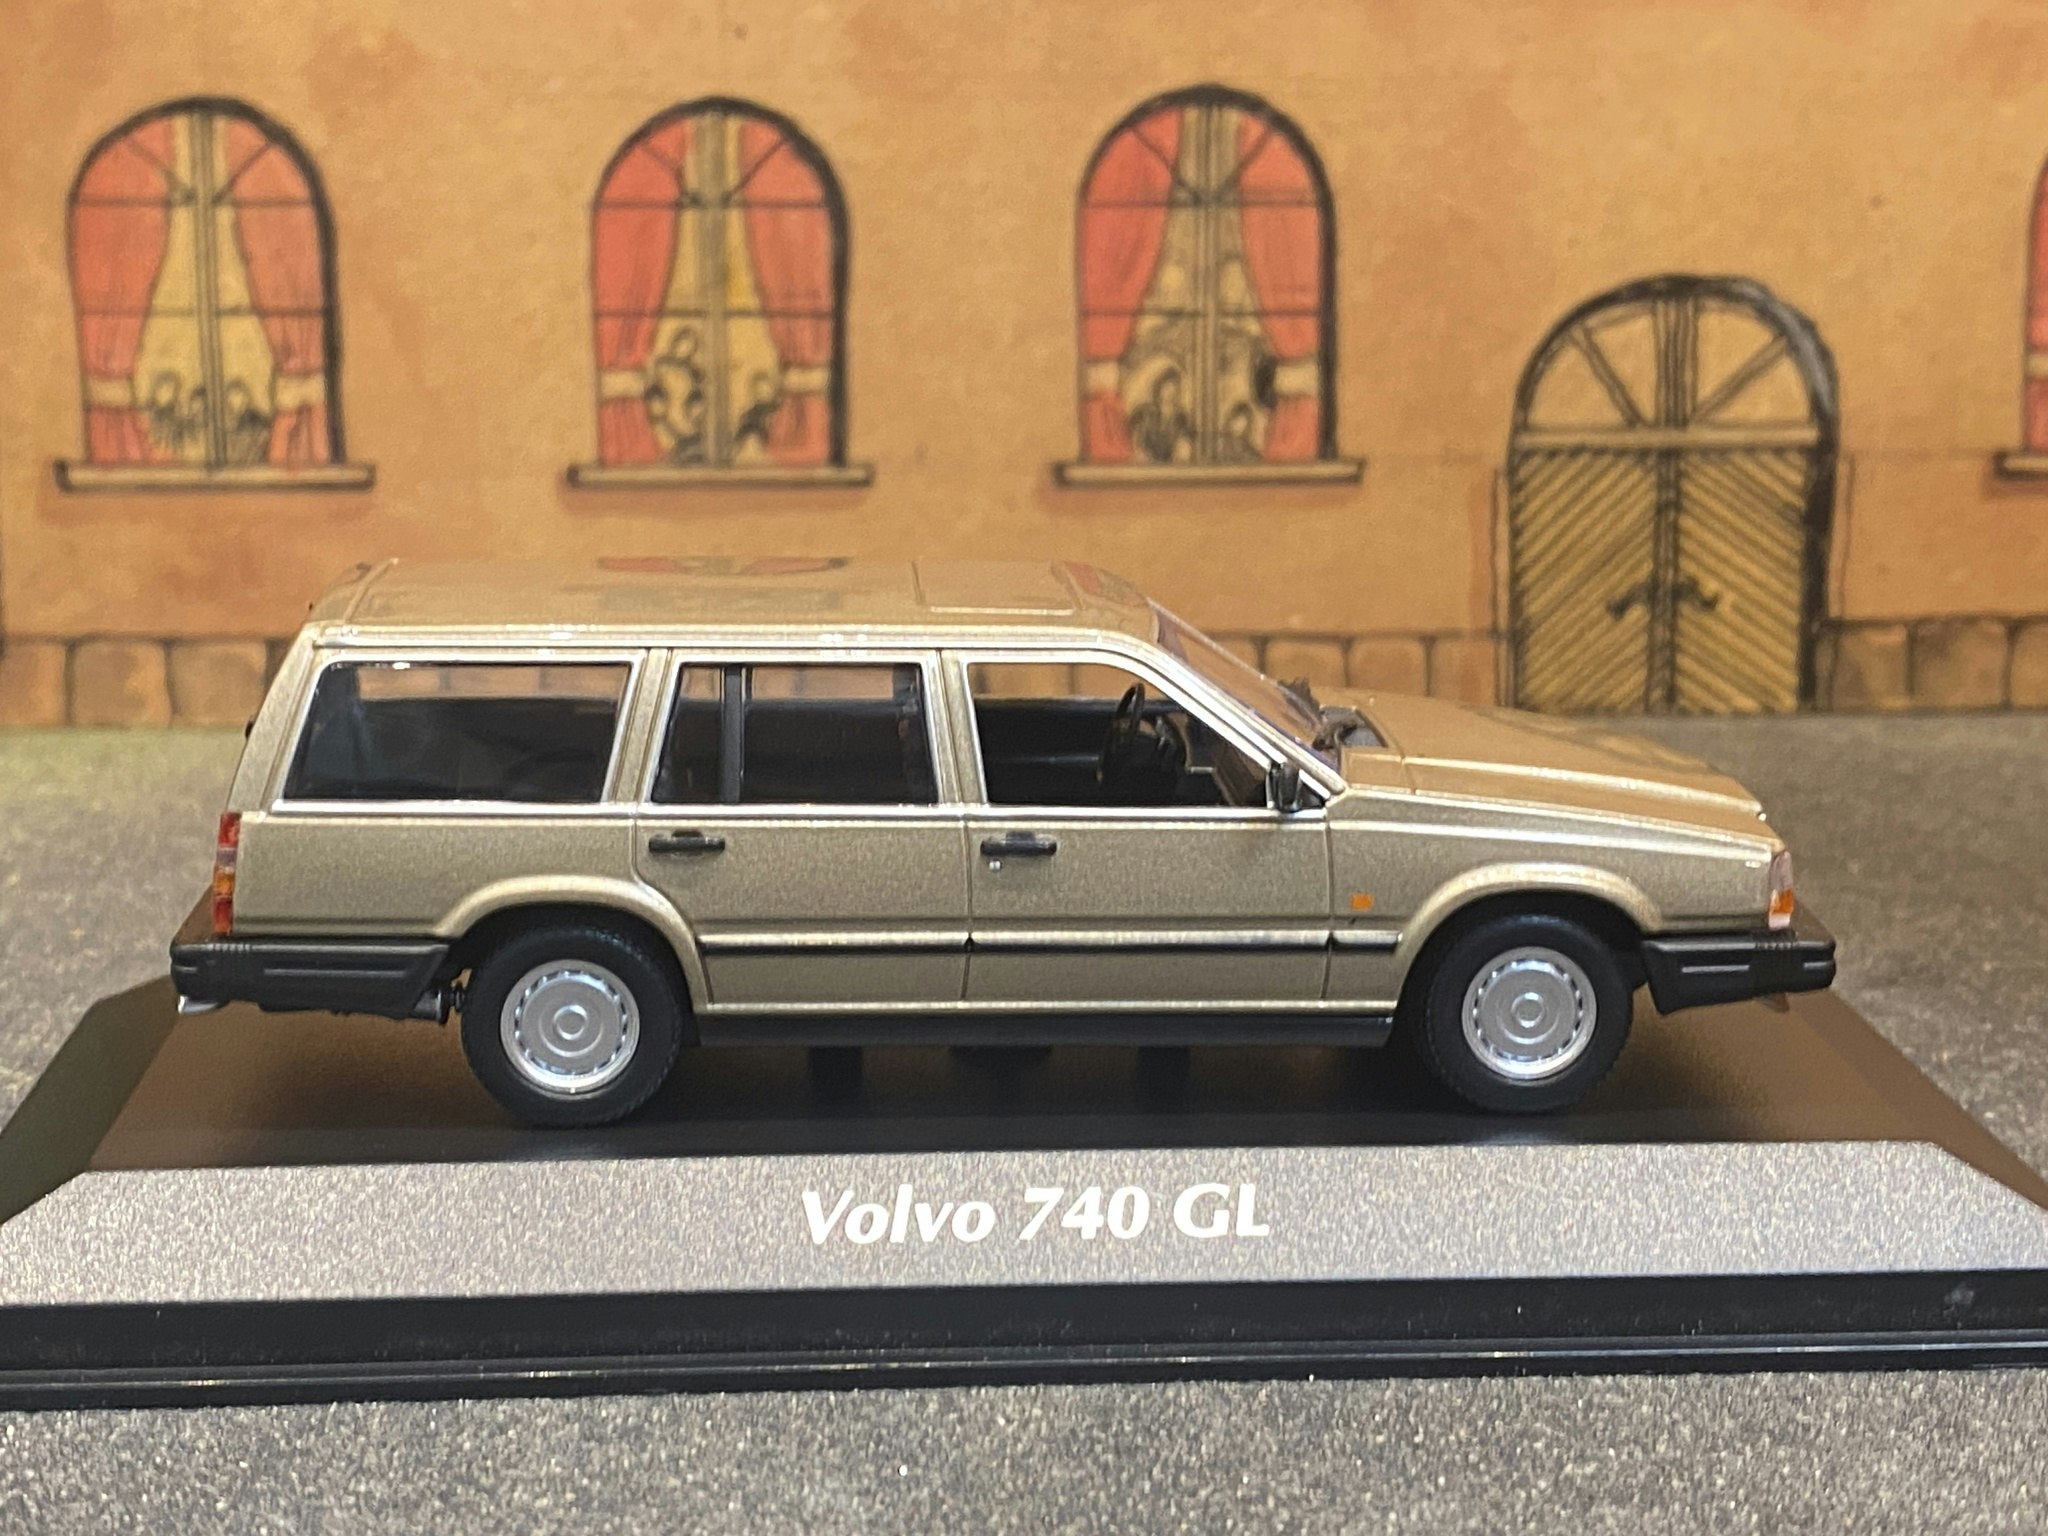 Scale 1/43 - 1986 Volvo 740 GL, Gold metallic for Maxichamps